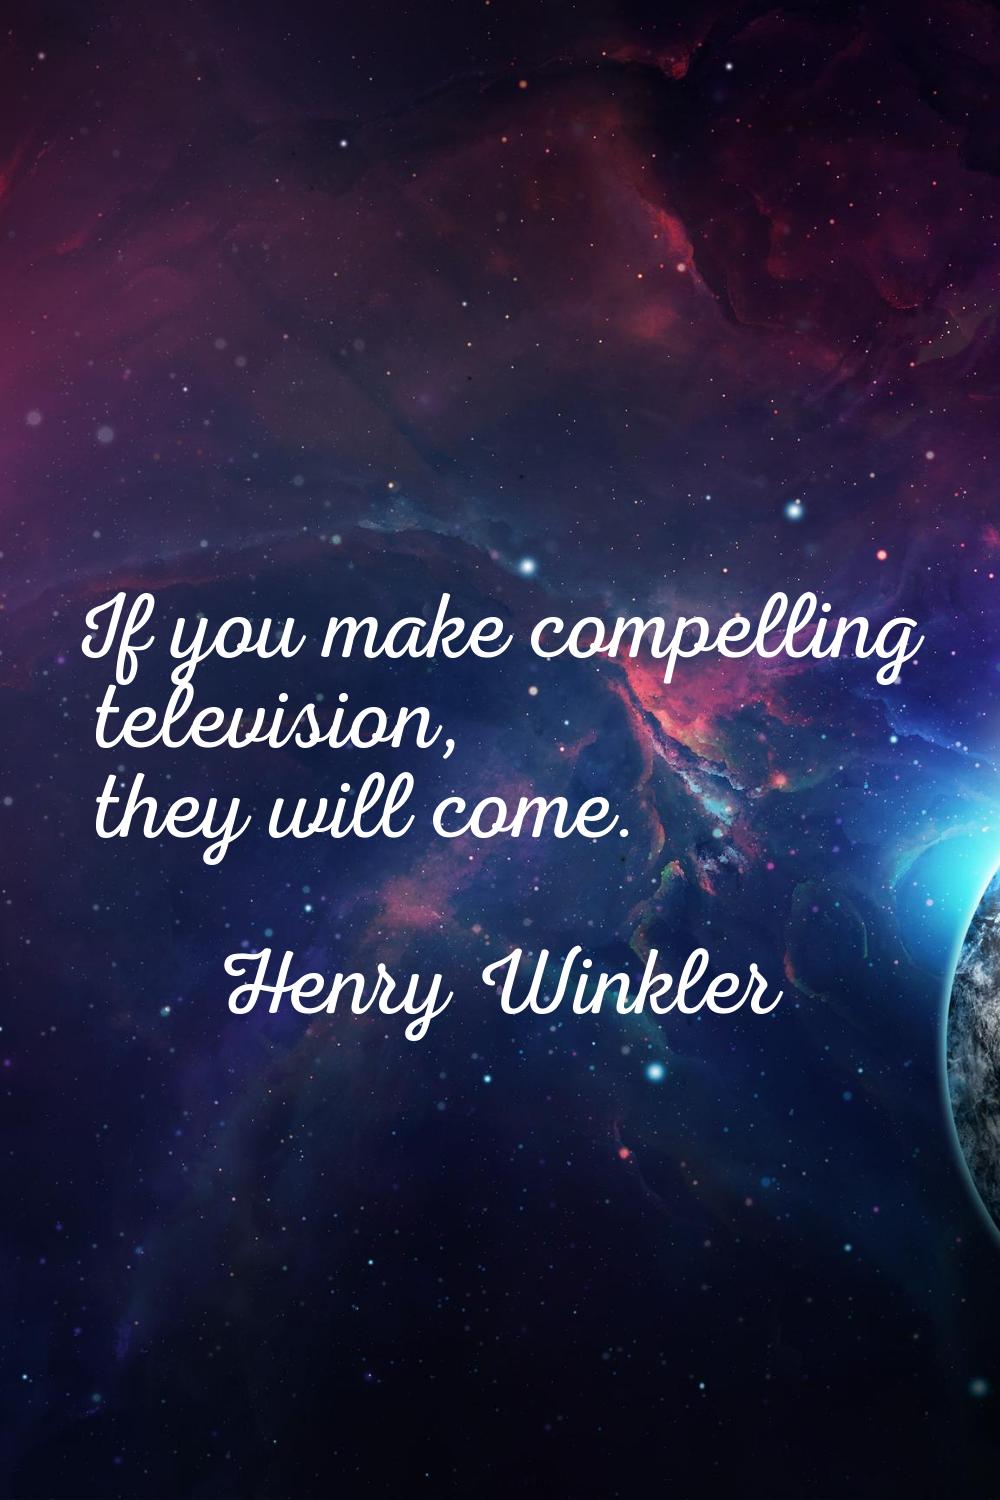 If you make compelling television, they will come.